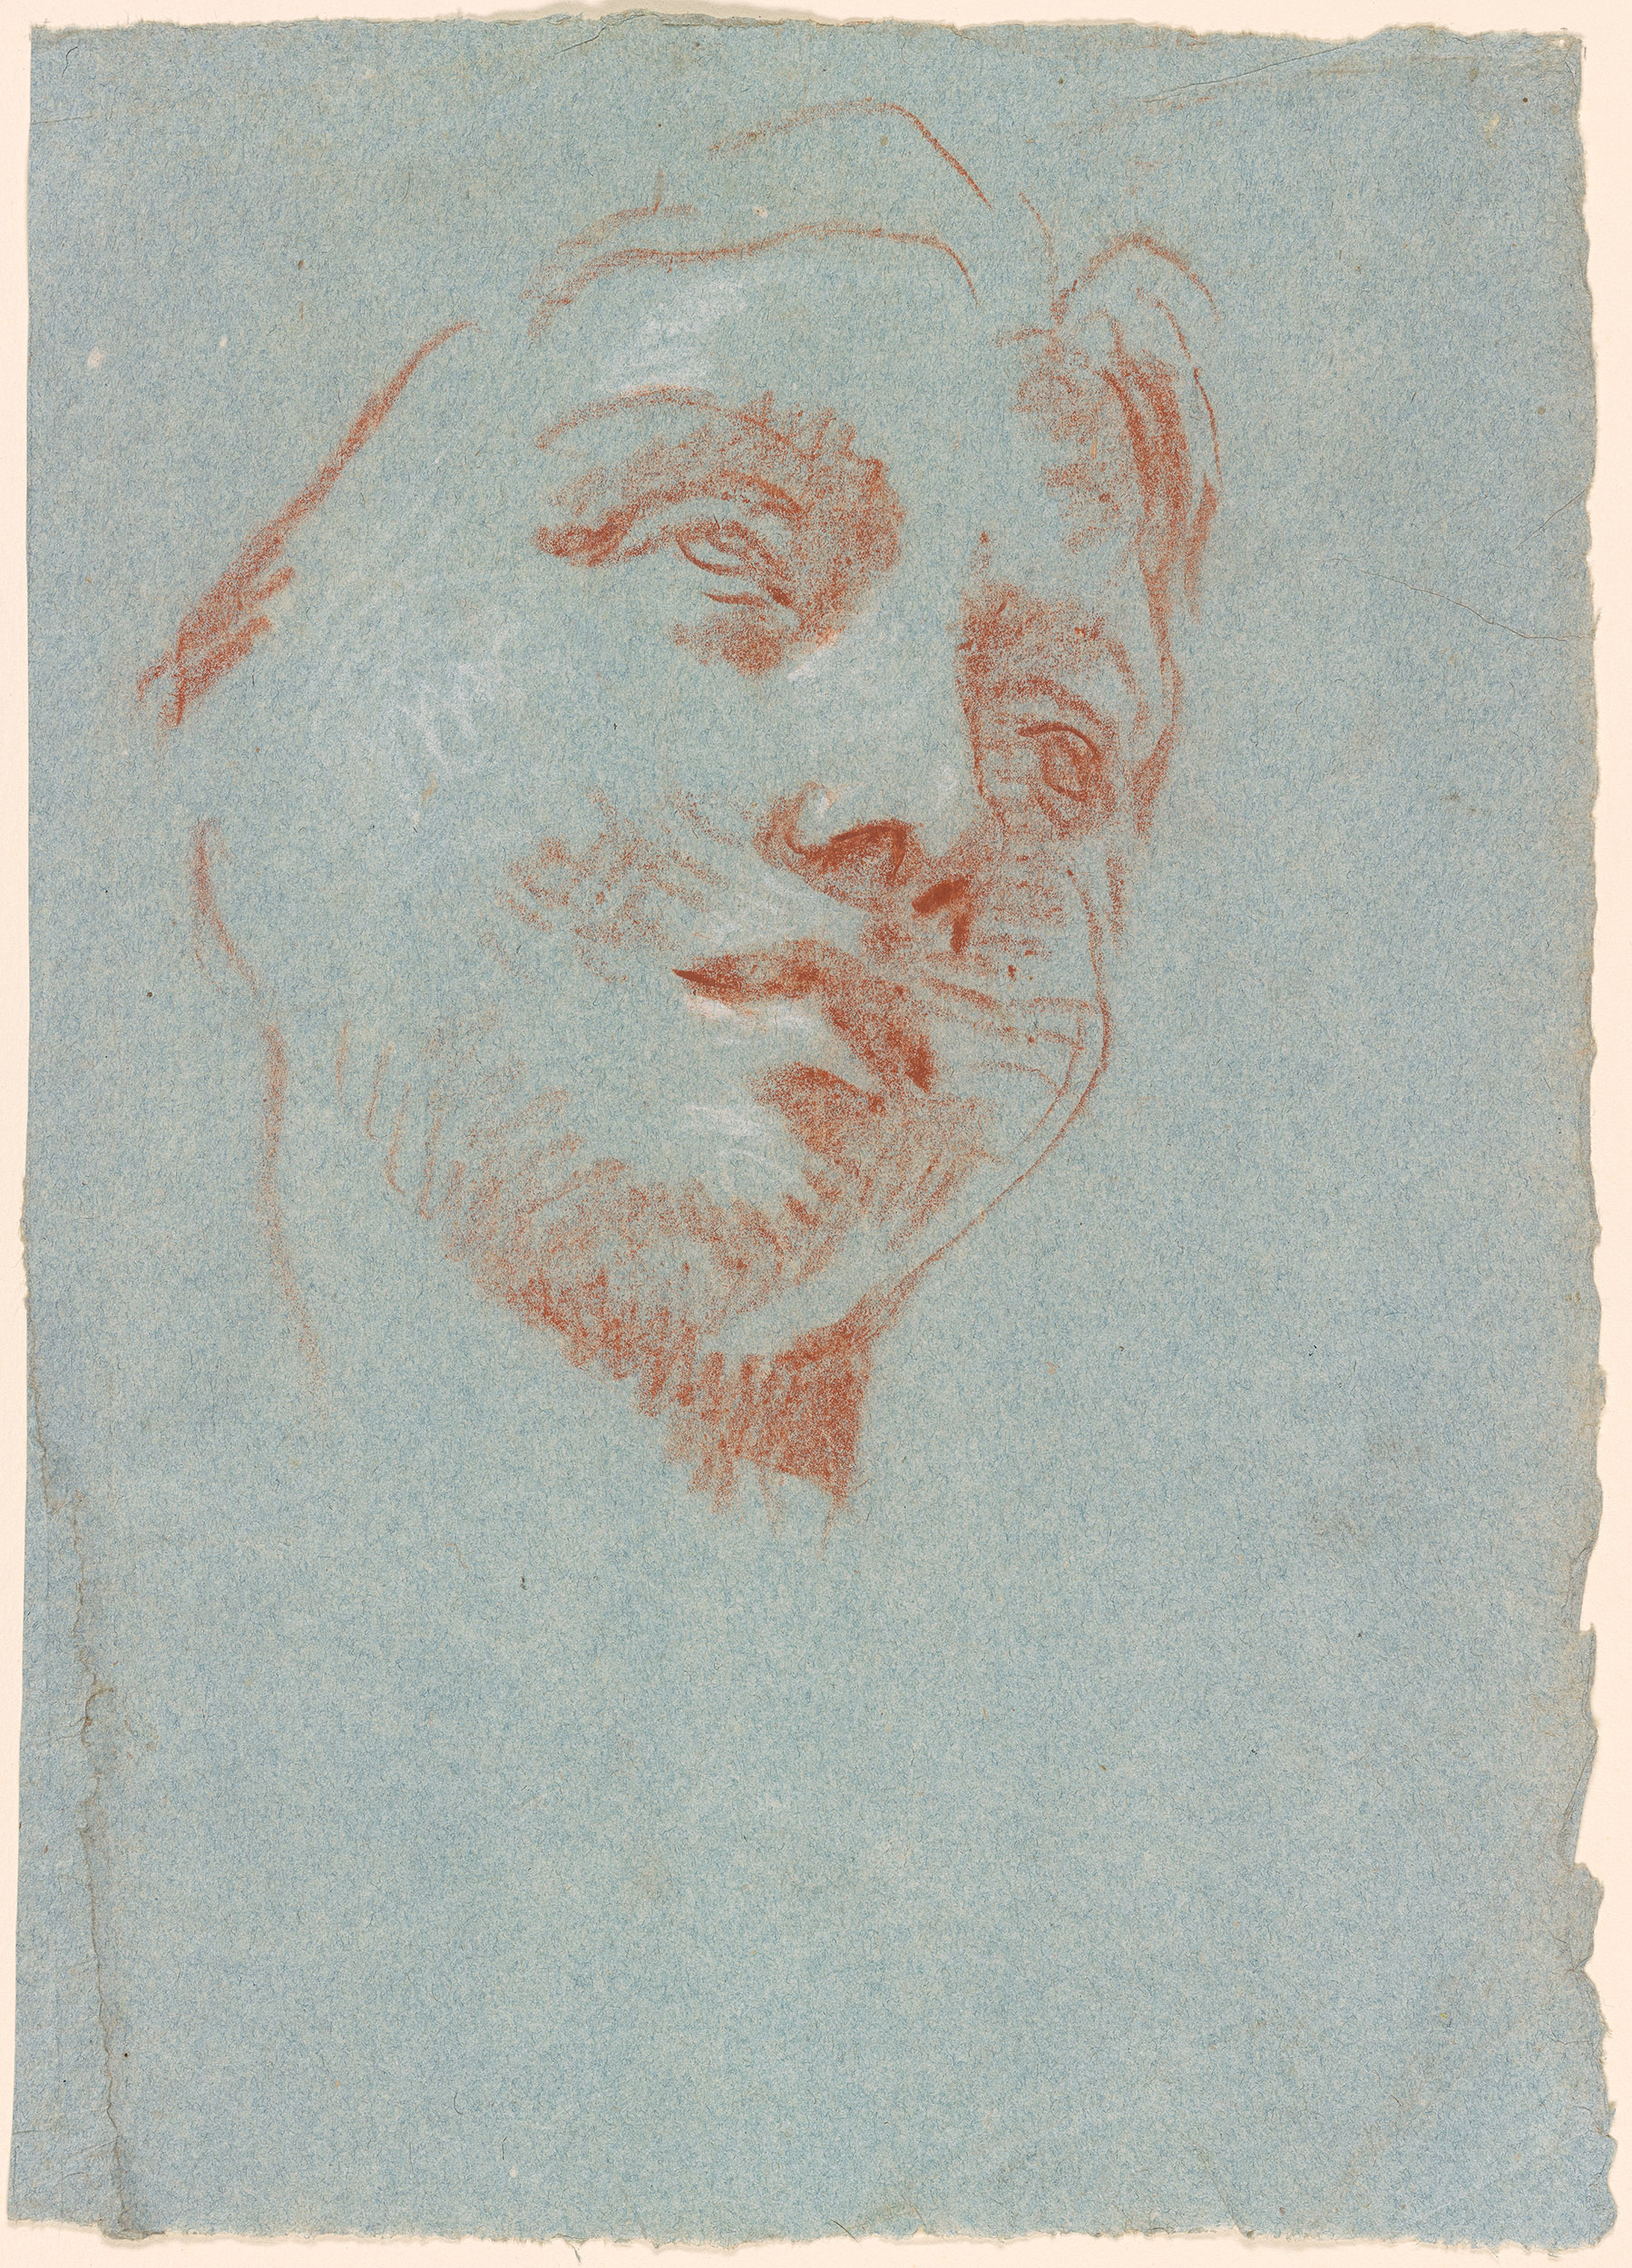 Giovanni Battista Tiepolo | Head of a Woman | Drawings Online | The